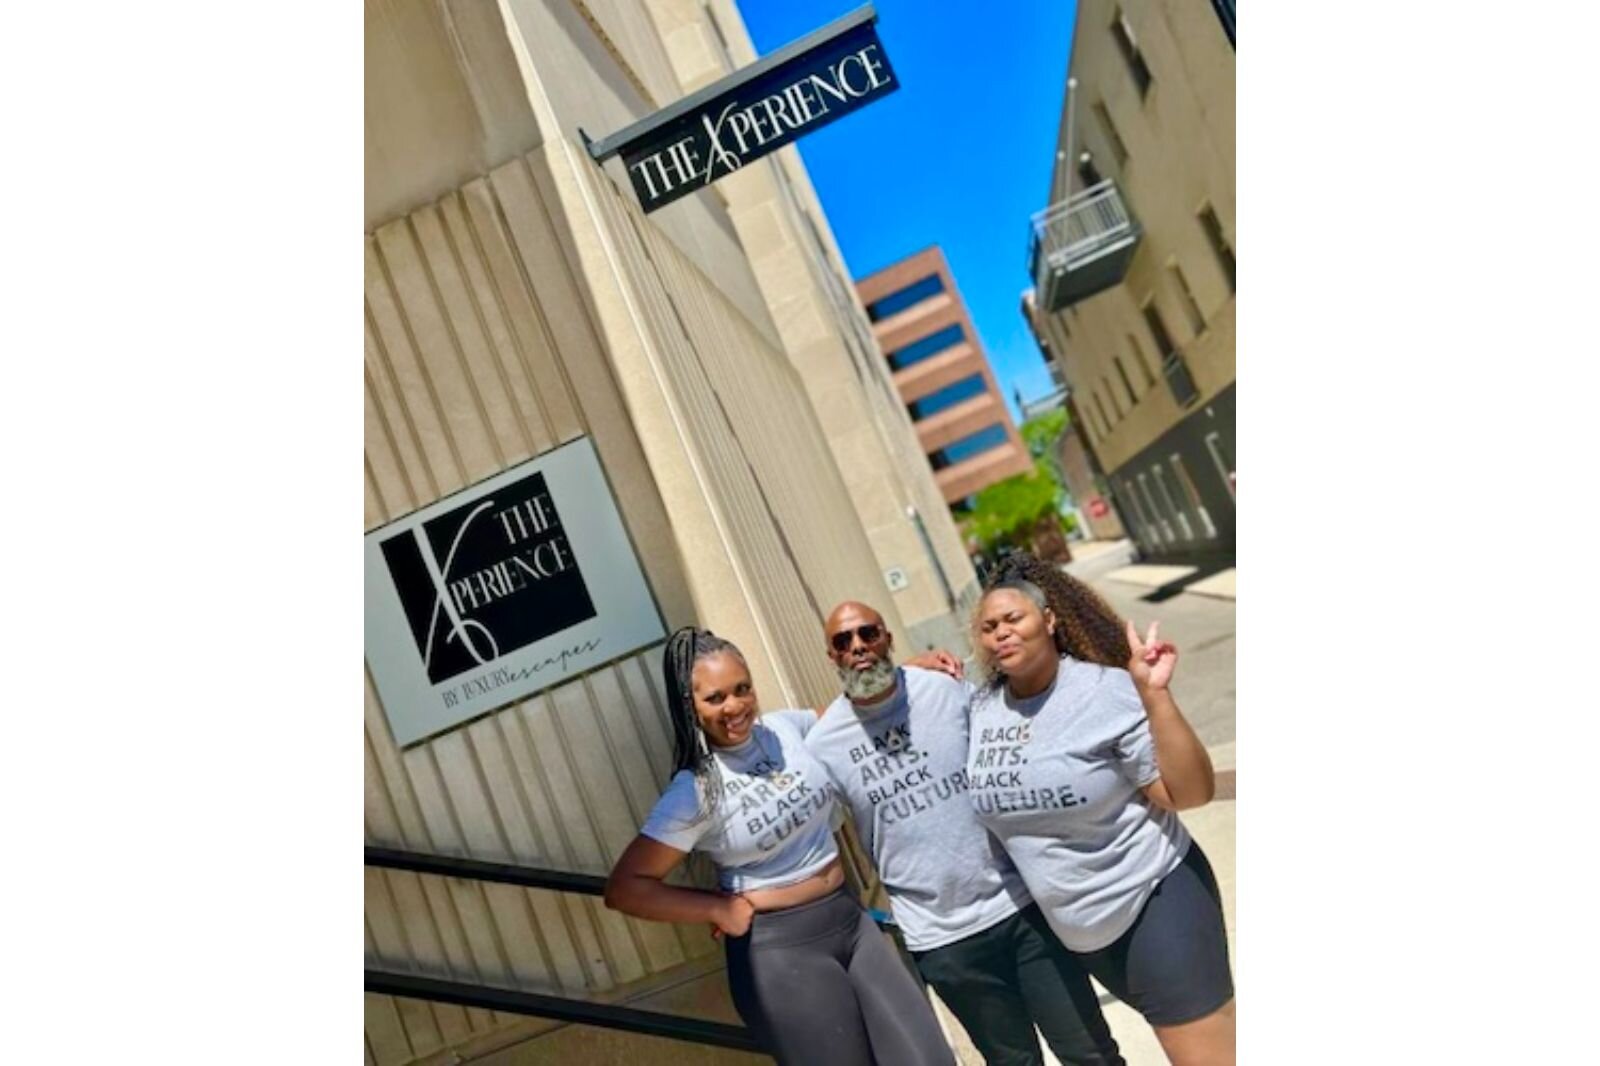 From left, Kim Guess, Bryan Sims, and Symphony Ollie stand outside the front entrance of The Xperience by Luxury Escape at 145 Farmers Alley in downtown Kalamazoo.